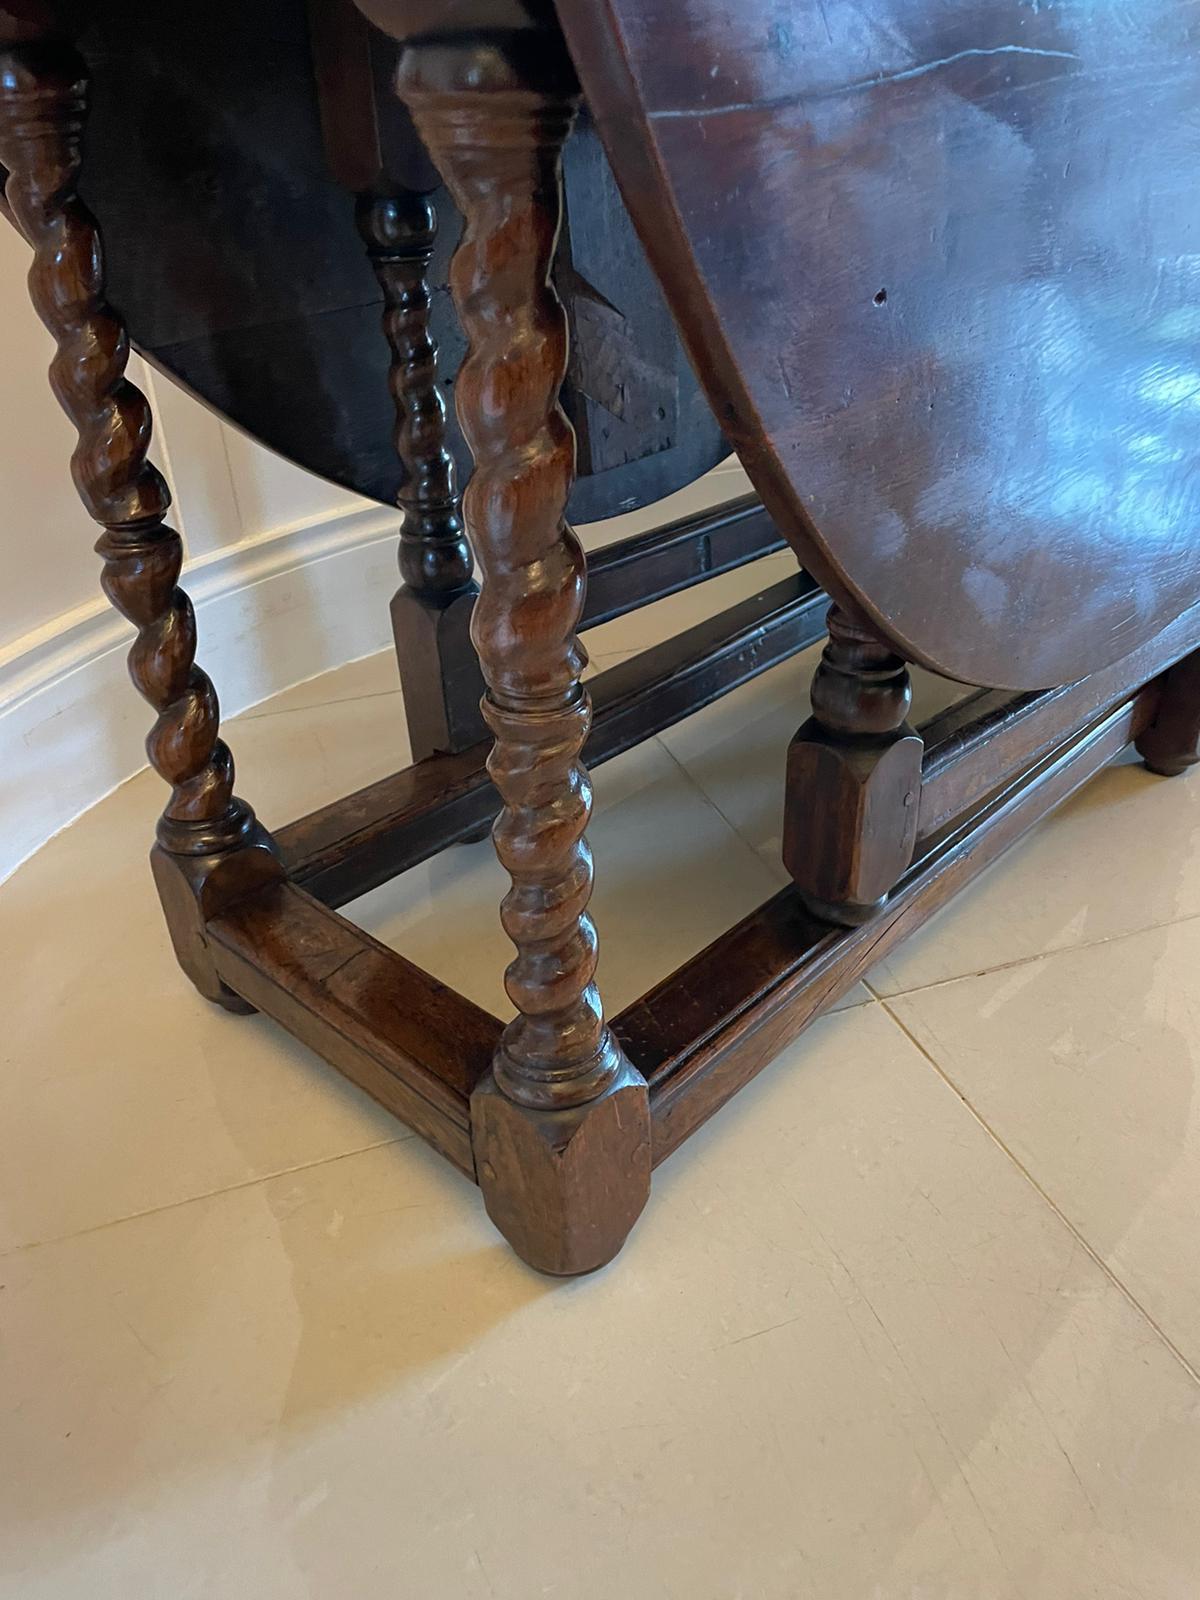 antique gate leg table with drawer